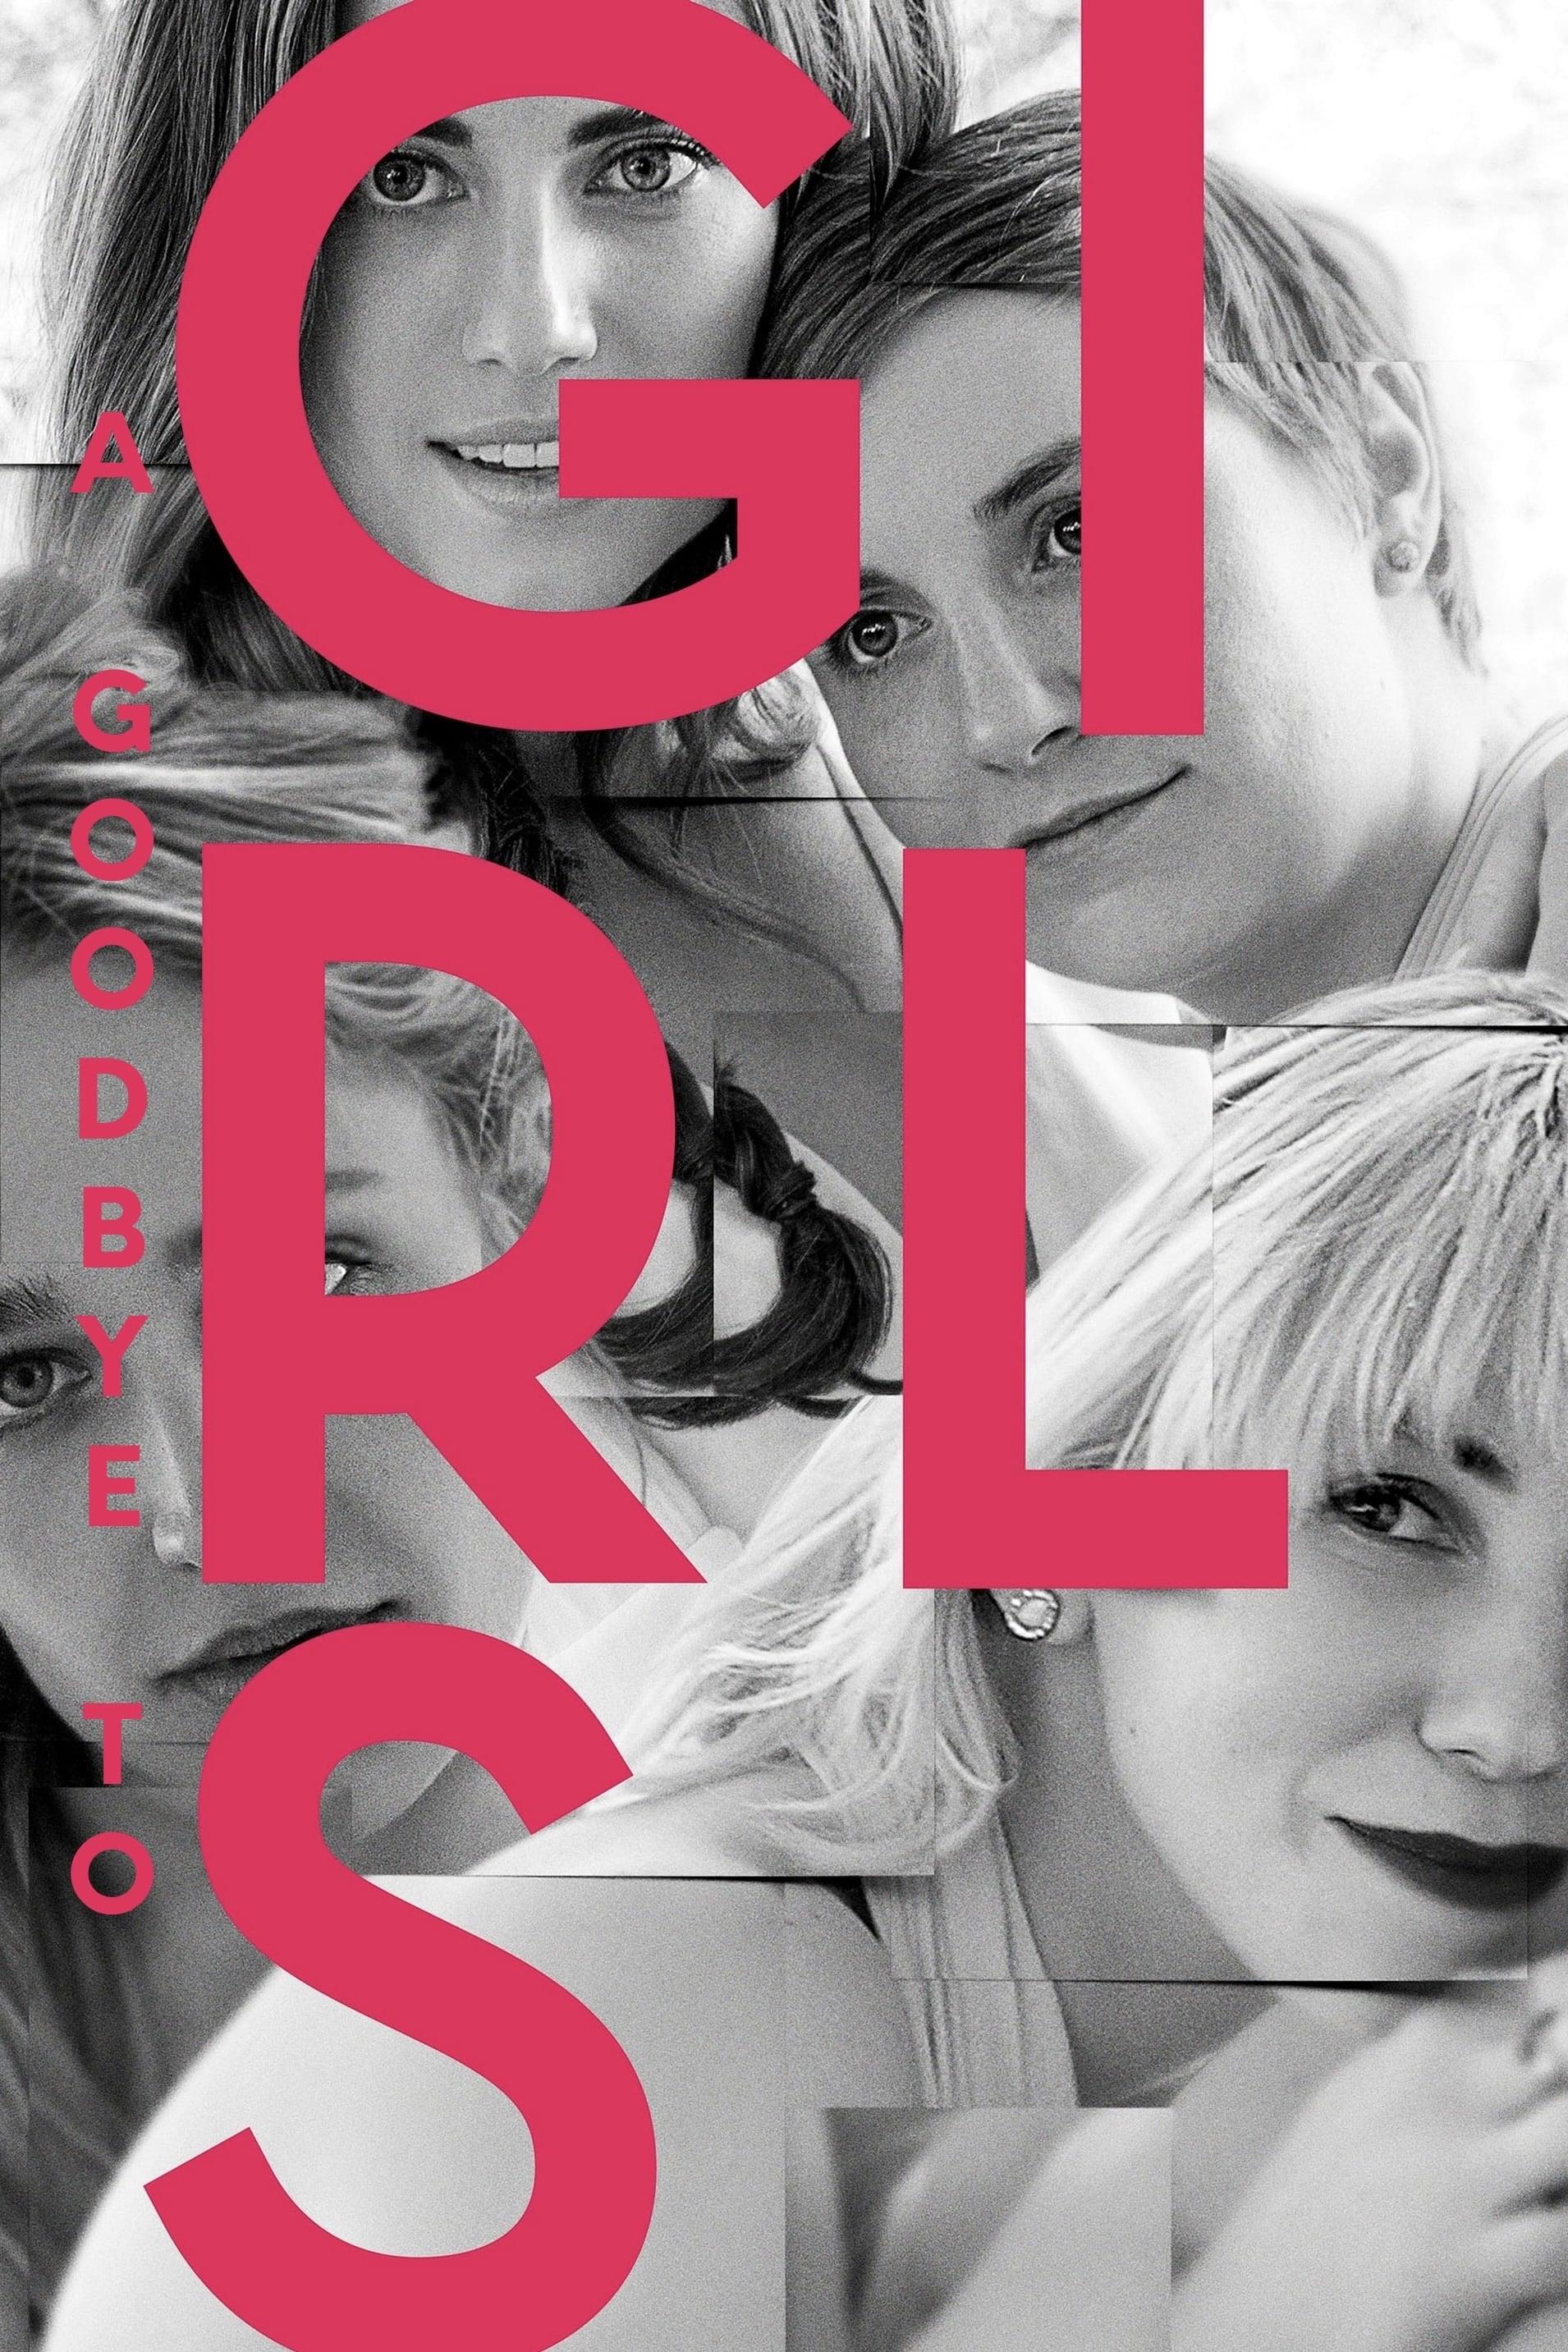 A Goodbye to Girls poster